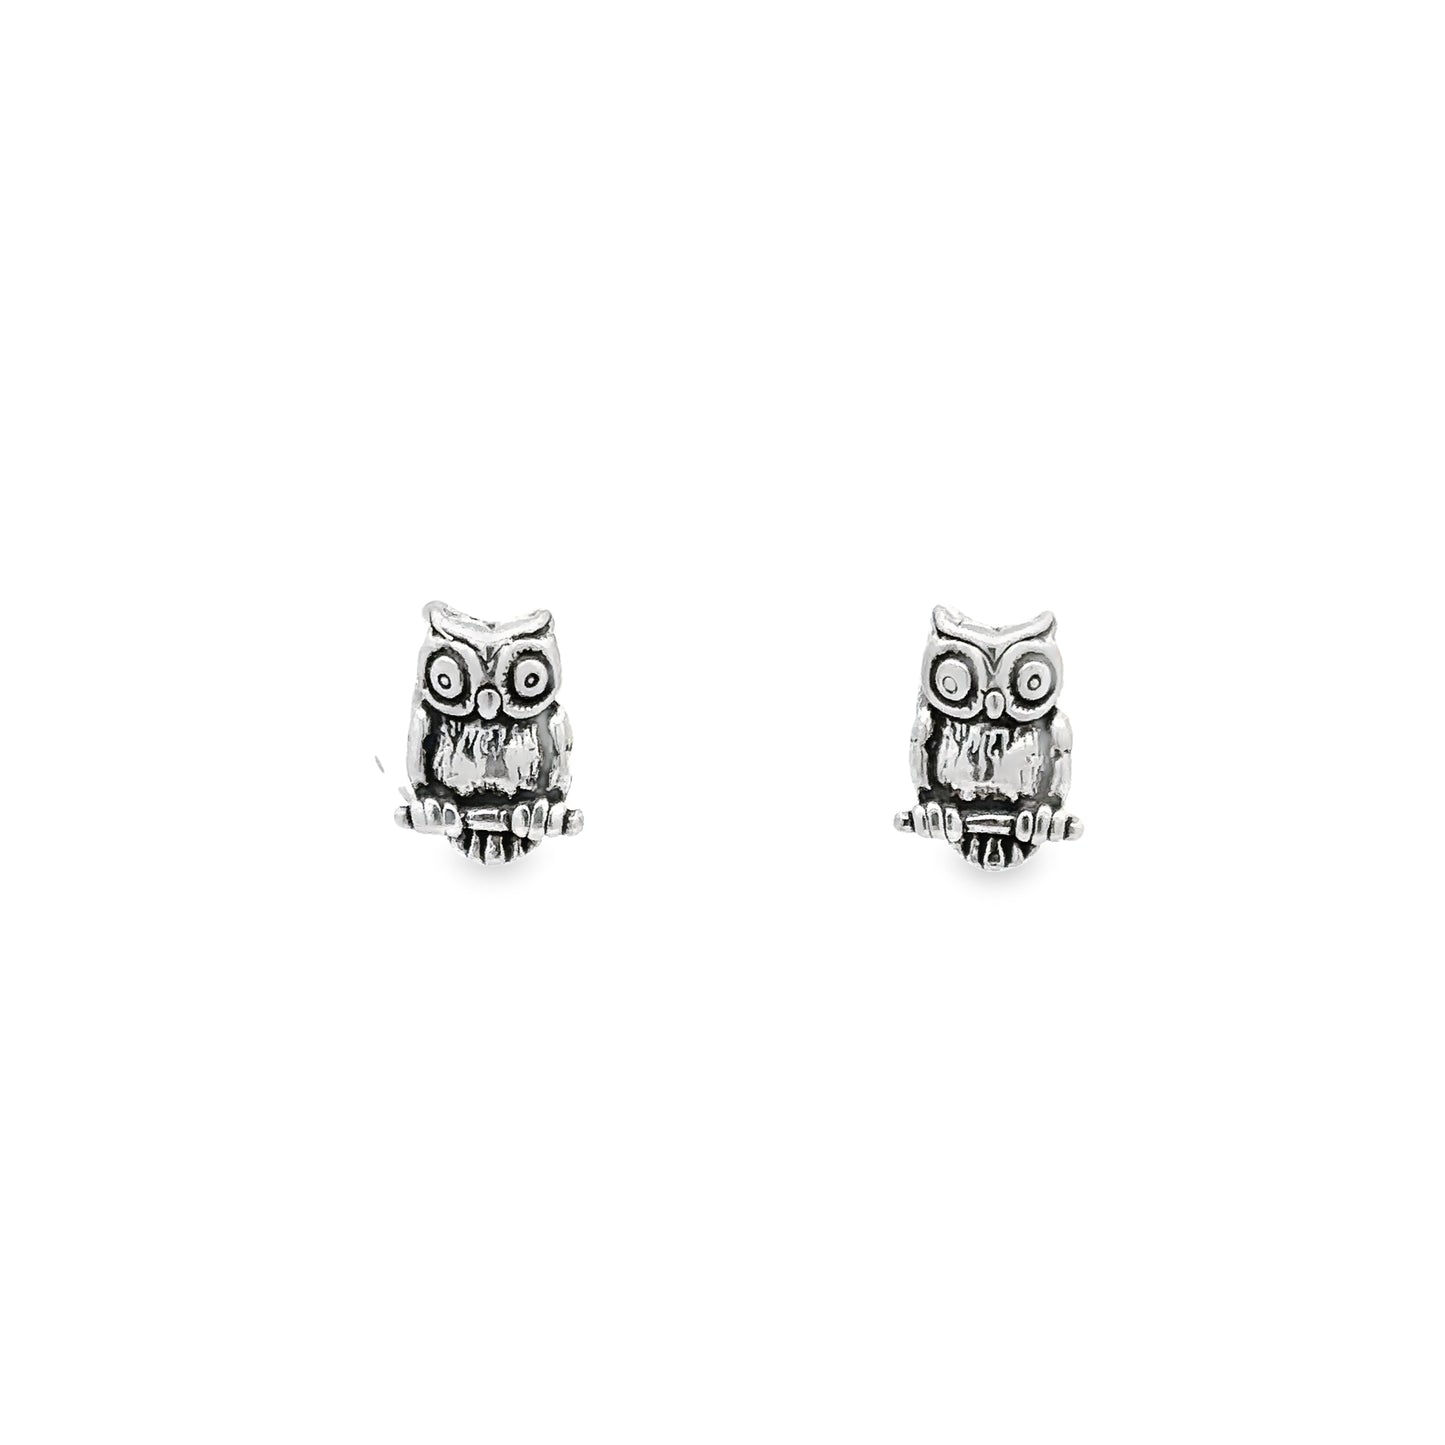 .925 Sterling Silver Owl Studs.